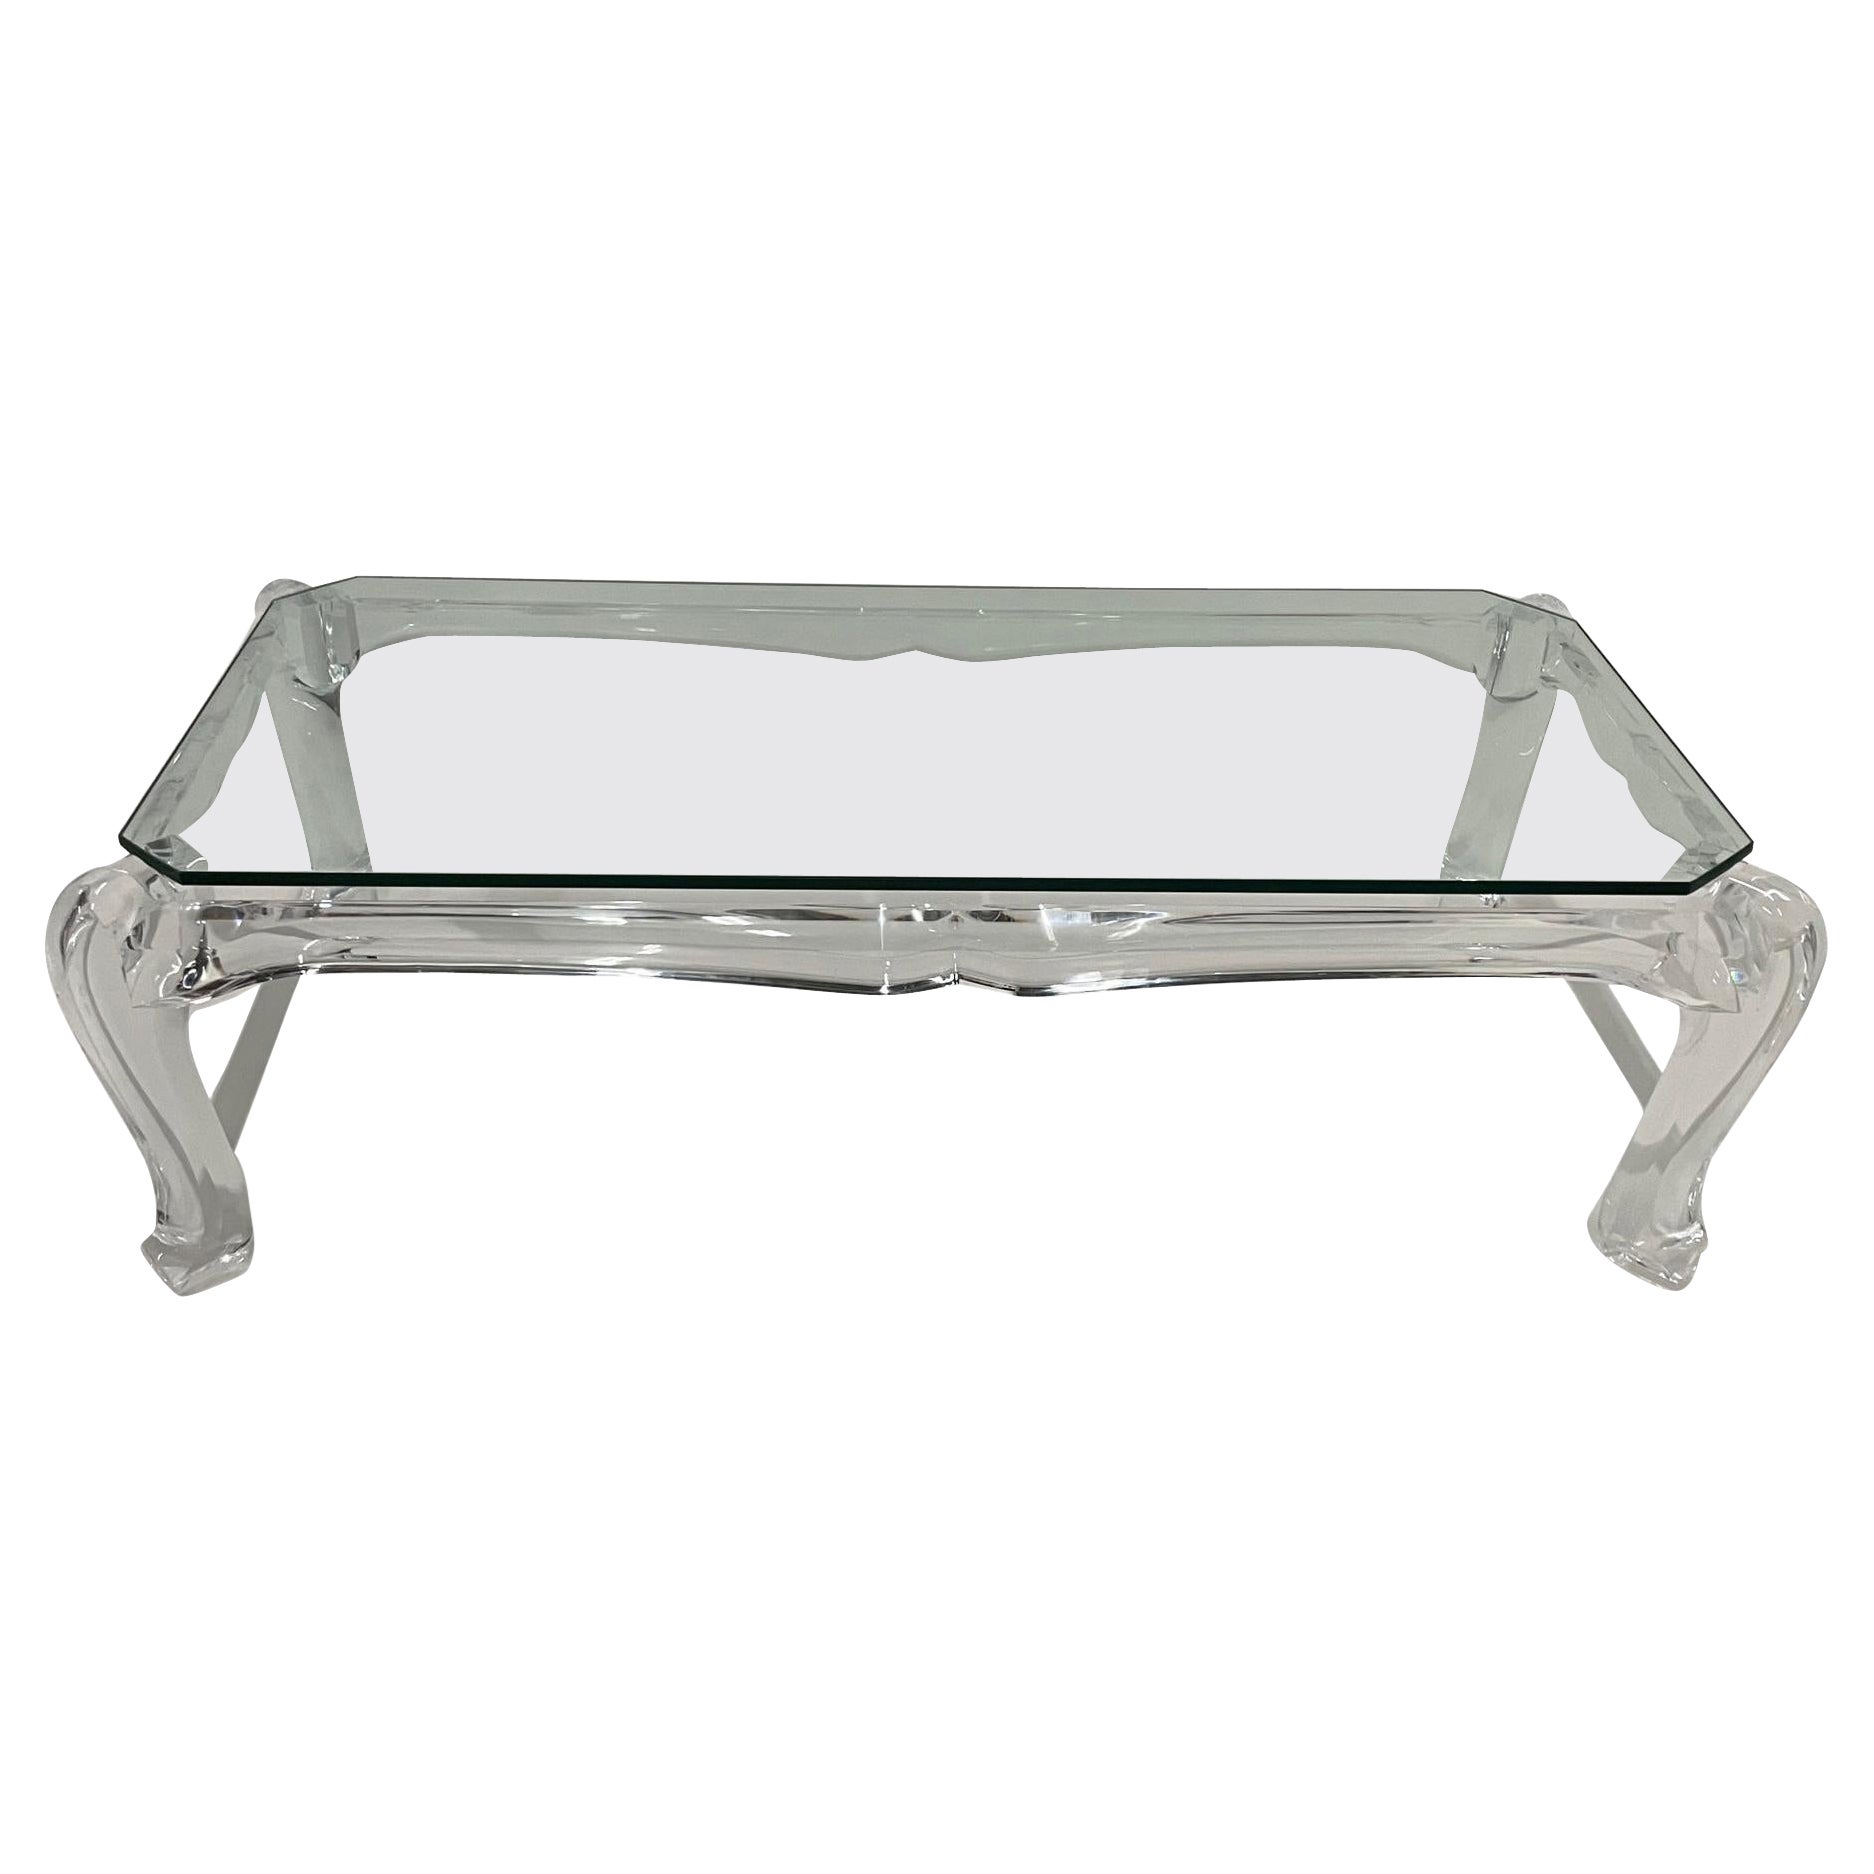 Super Hot Lucite Sculptural Mid-Century Modern Coffee Table For Sale